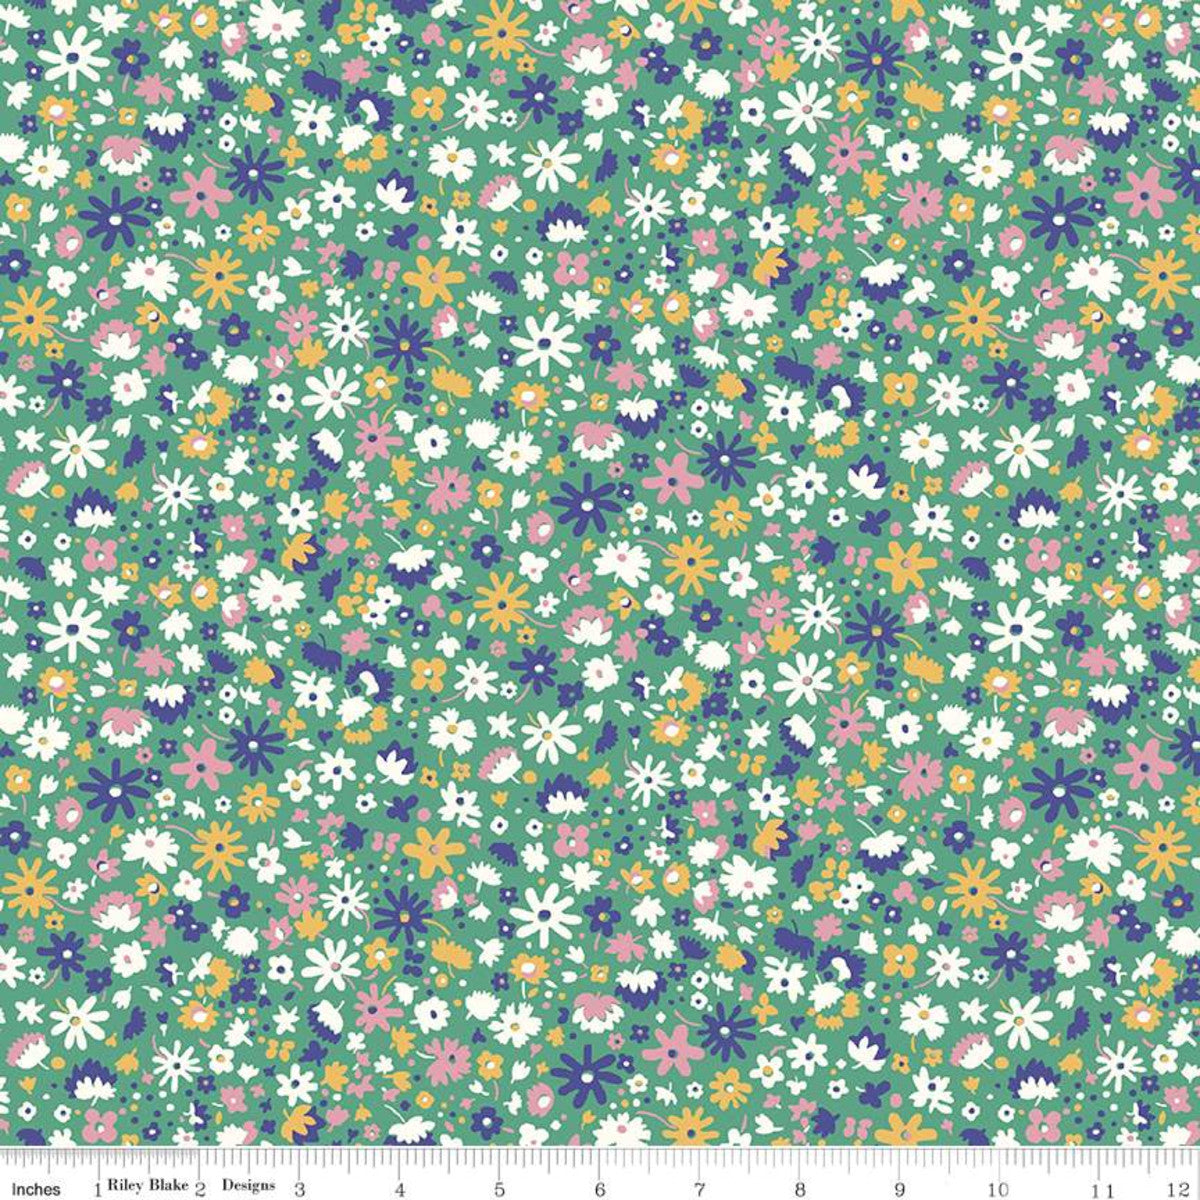 Carnaby Bloomsbury Blossom C - Bohemian Brights - Liberty of London - Riley Blake Designs - yard fabric - quilting cotton